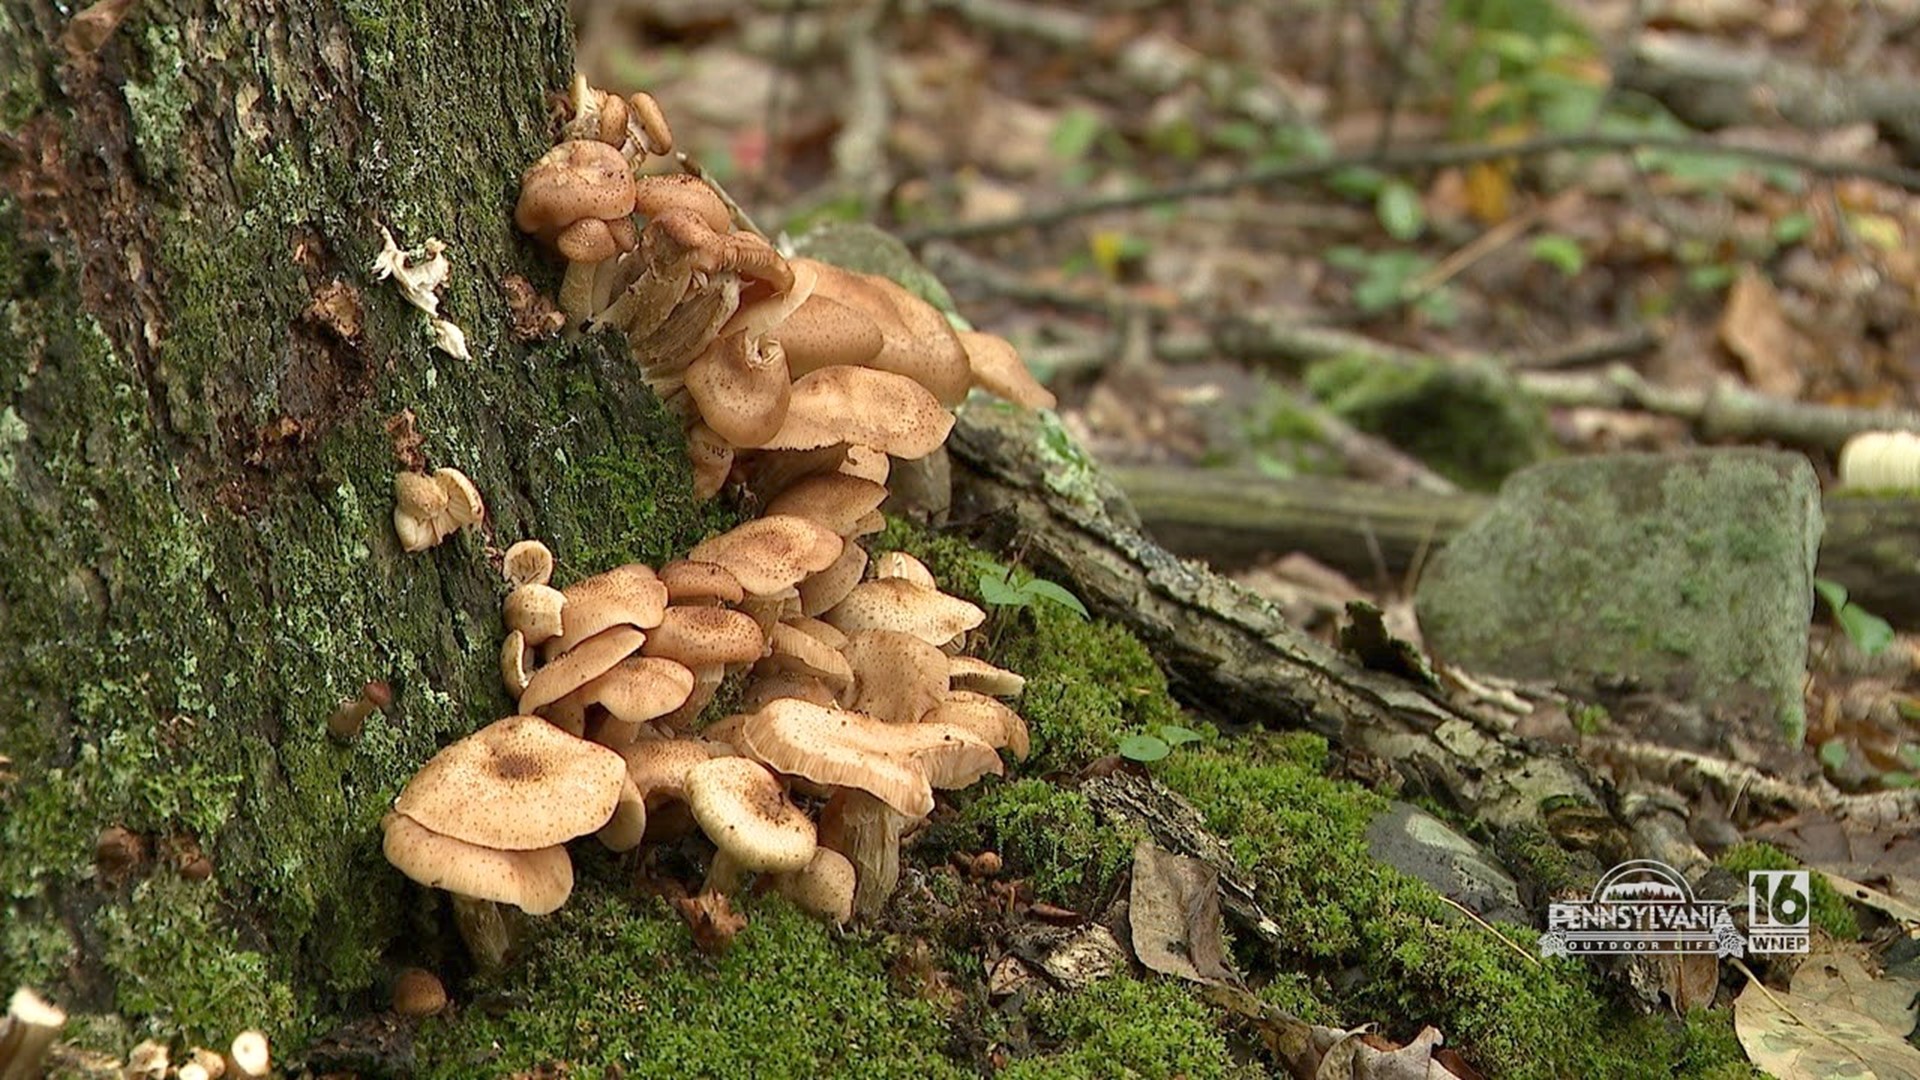 Now's the time to find some edible mushrooms.